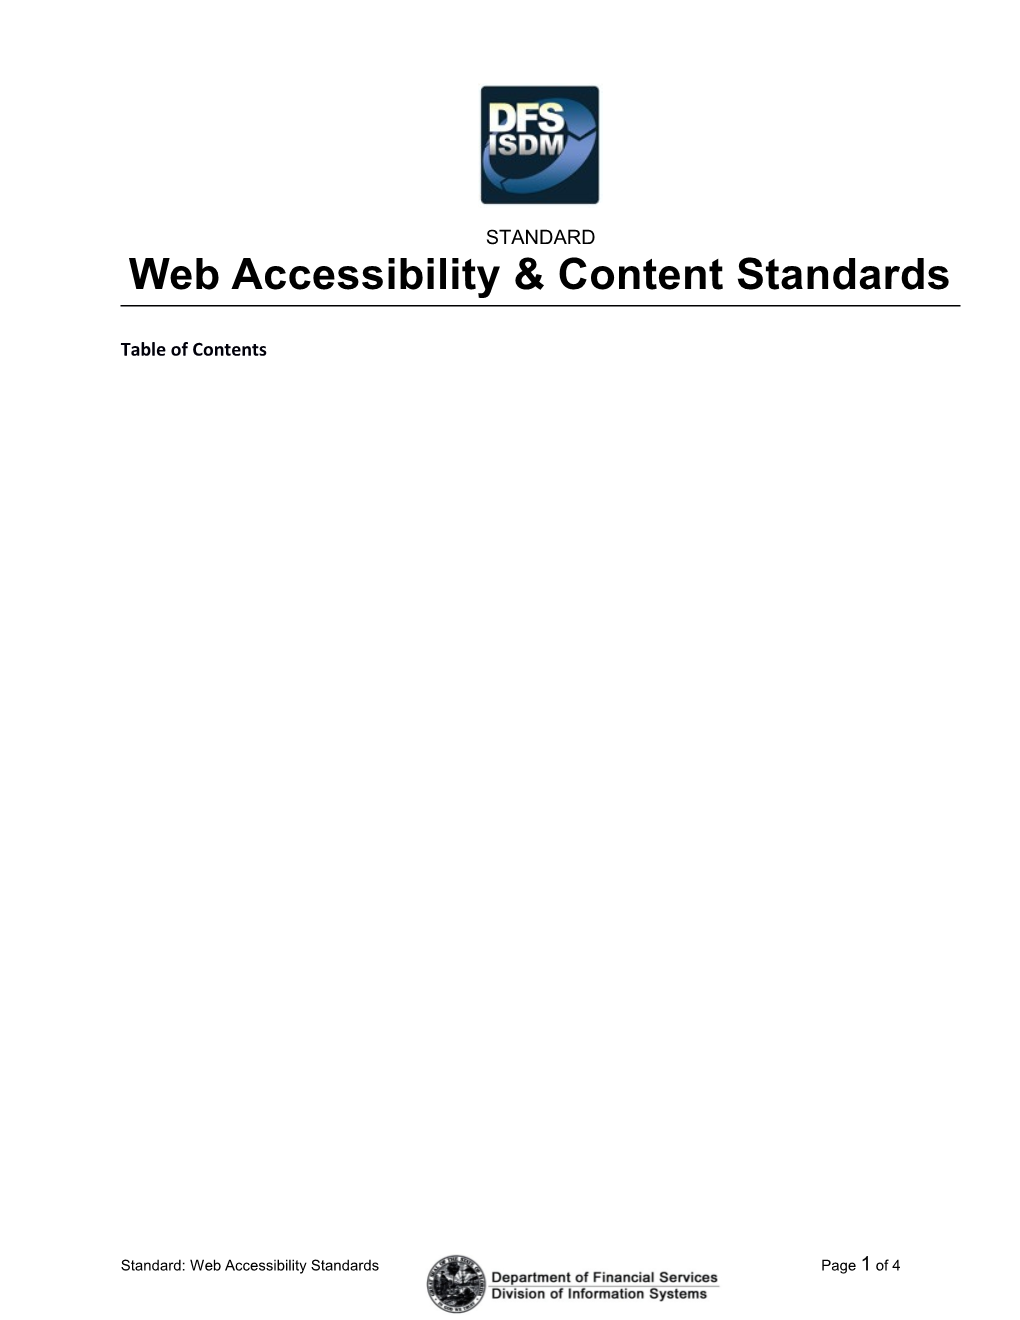 Web Accessibility Content Standards